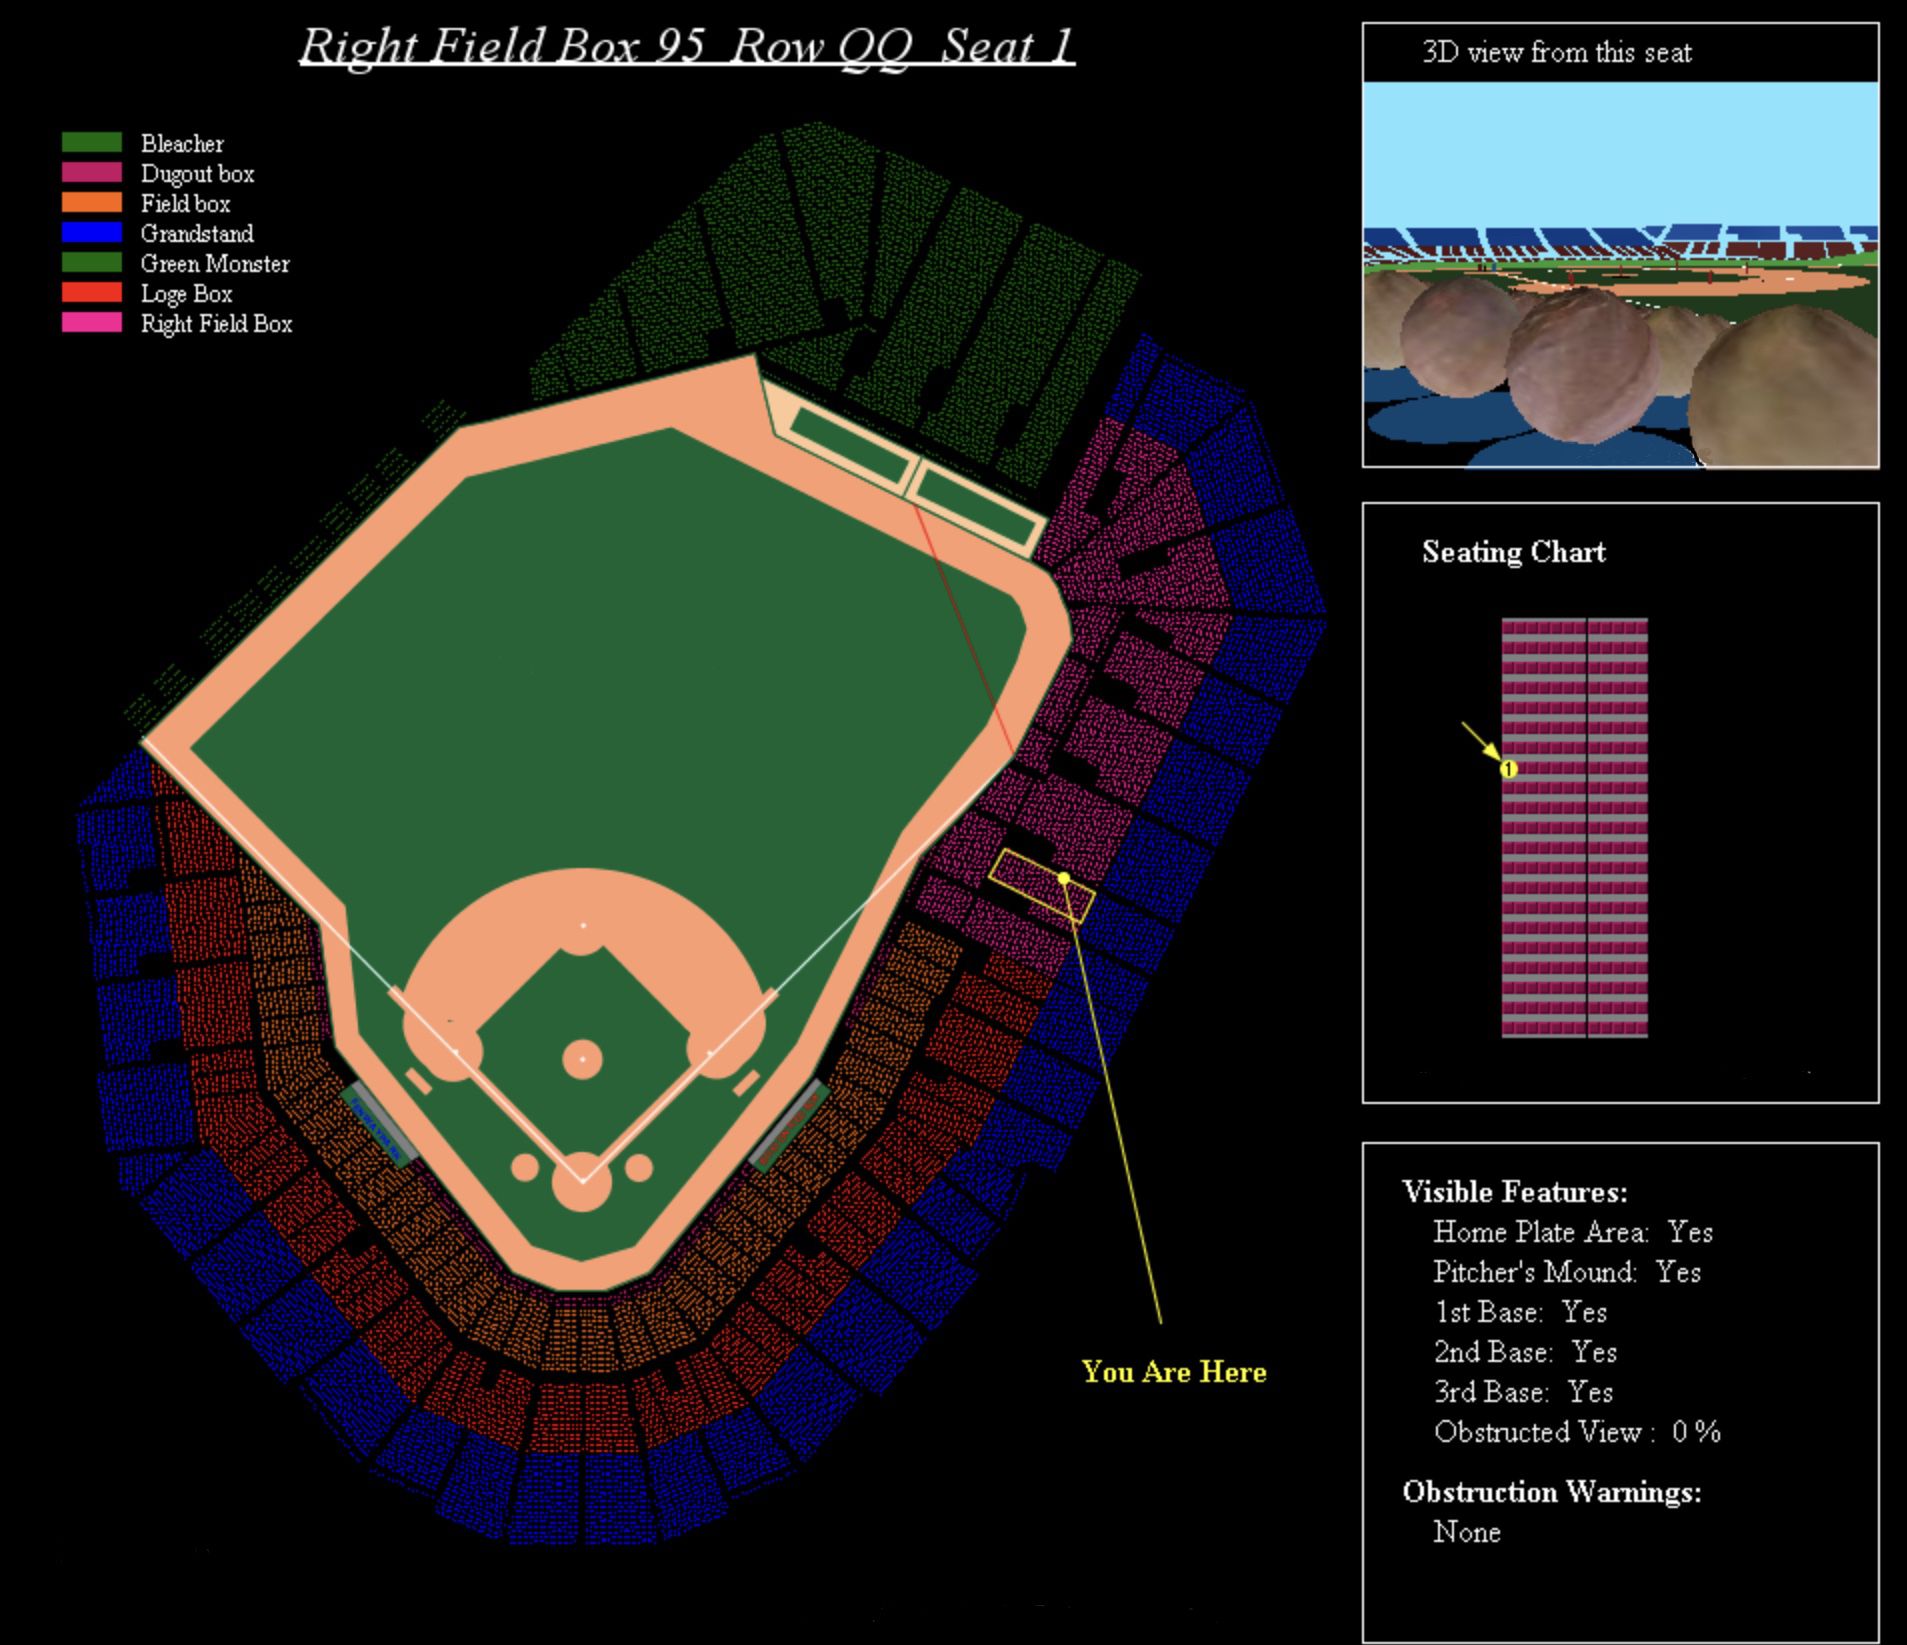 Baltimore Orioles at Boston Red Sox - Thur Sept 29 - 2 Tickets